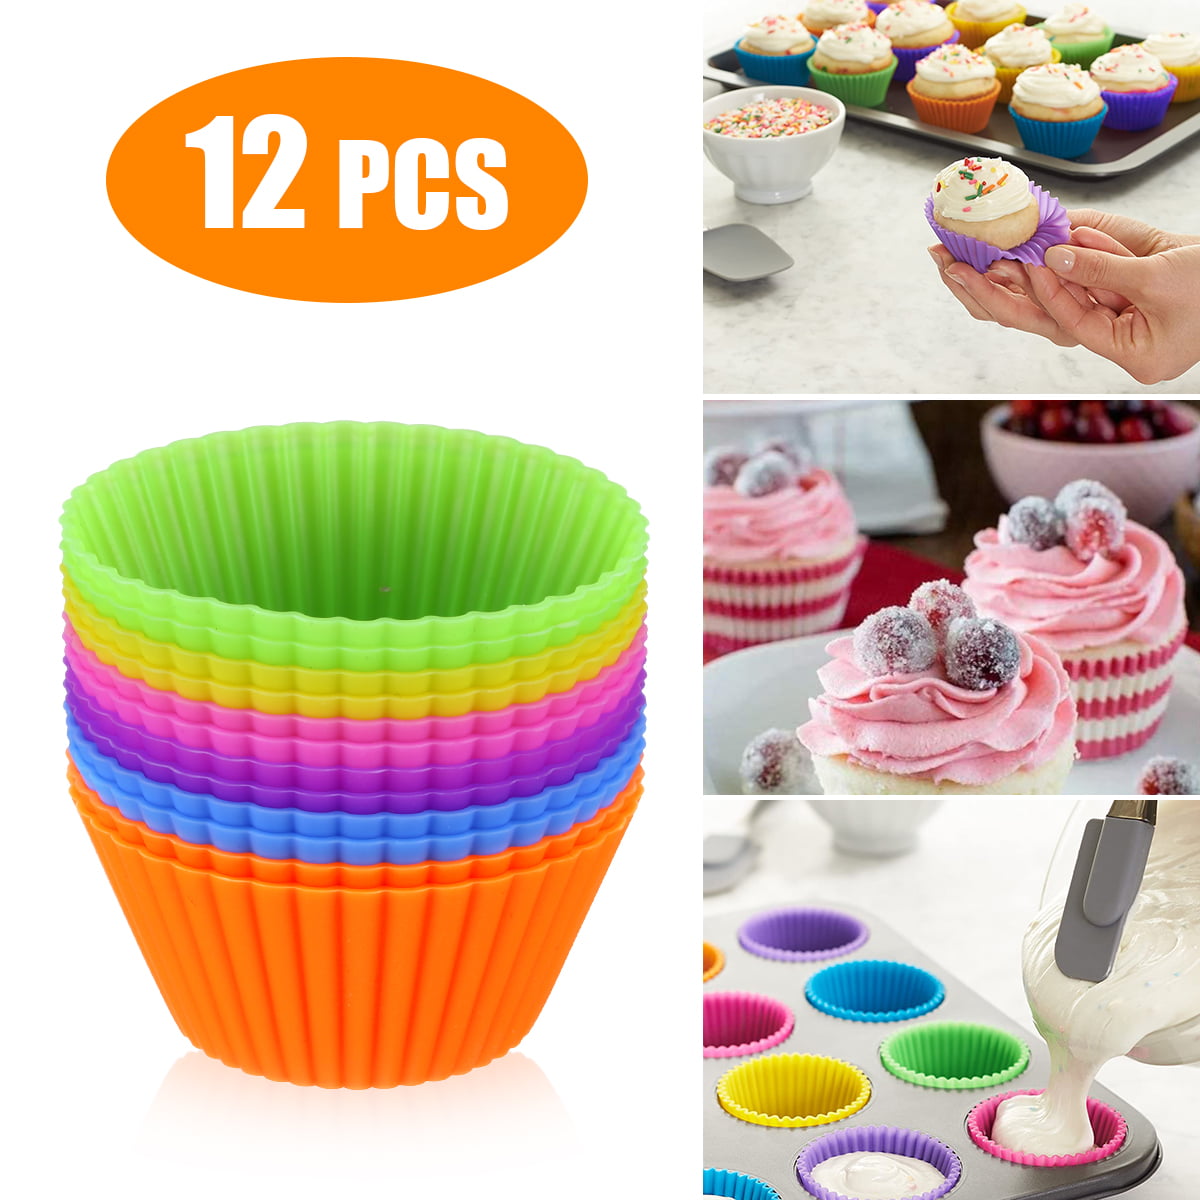 12Pcs Silicone Cake Muffin Chocolate Cupcake Liner for Baking Cups Cookie Molds 